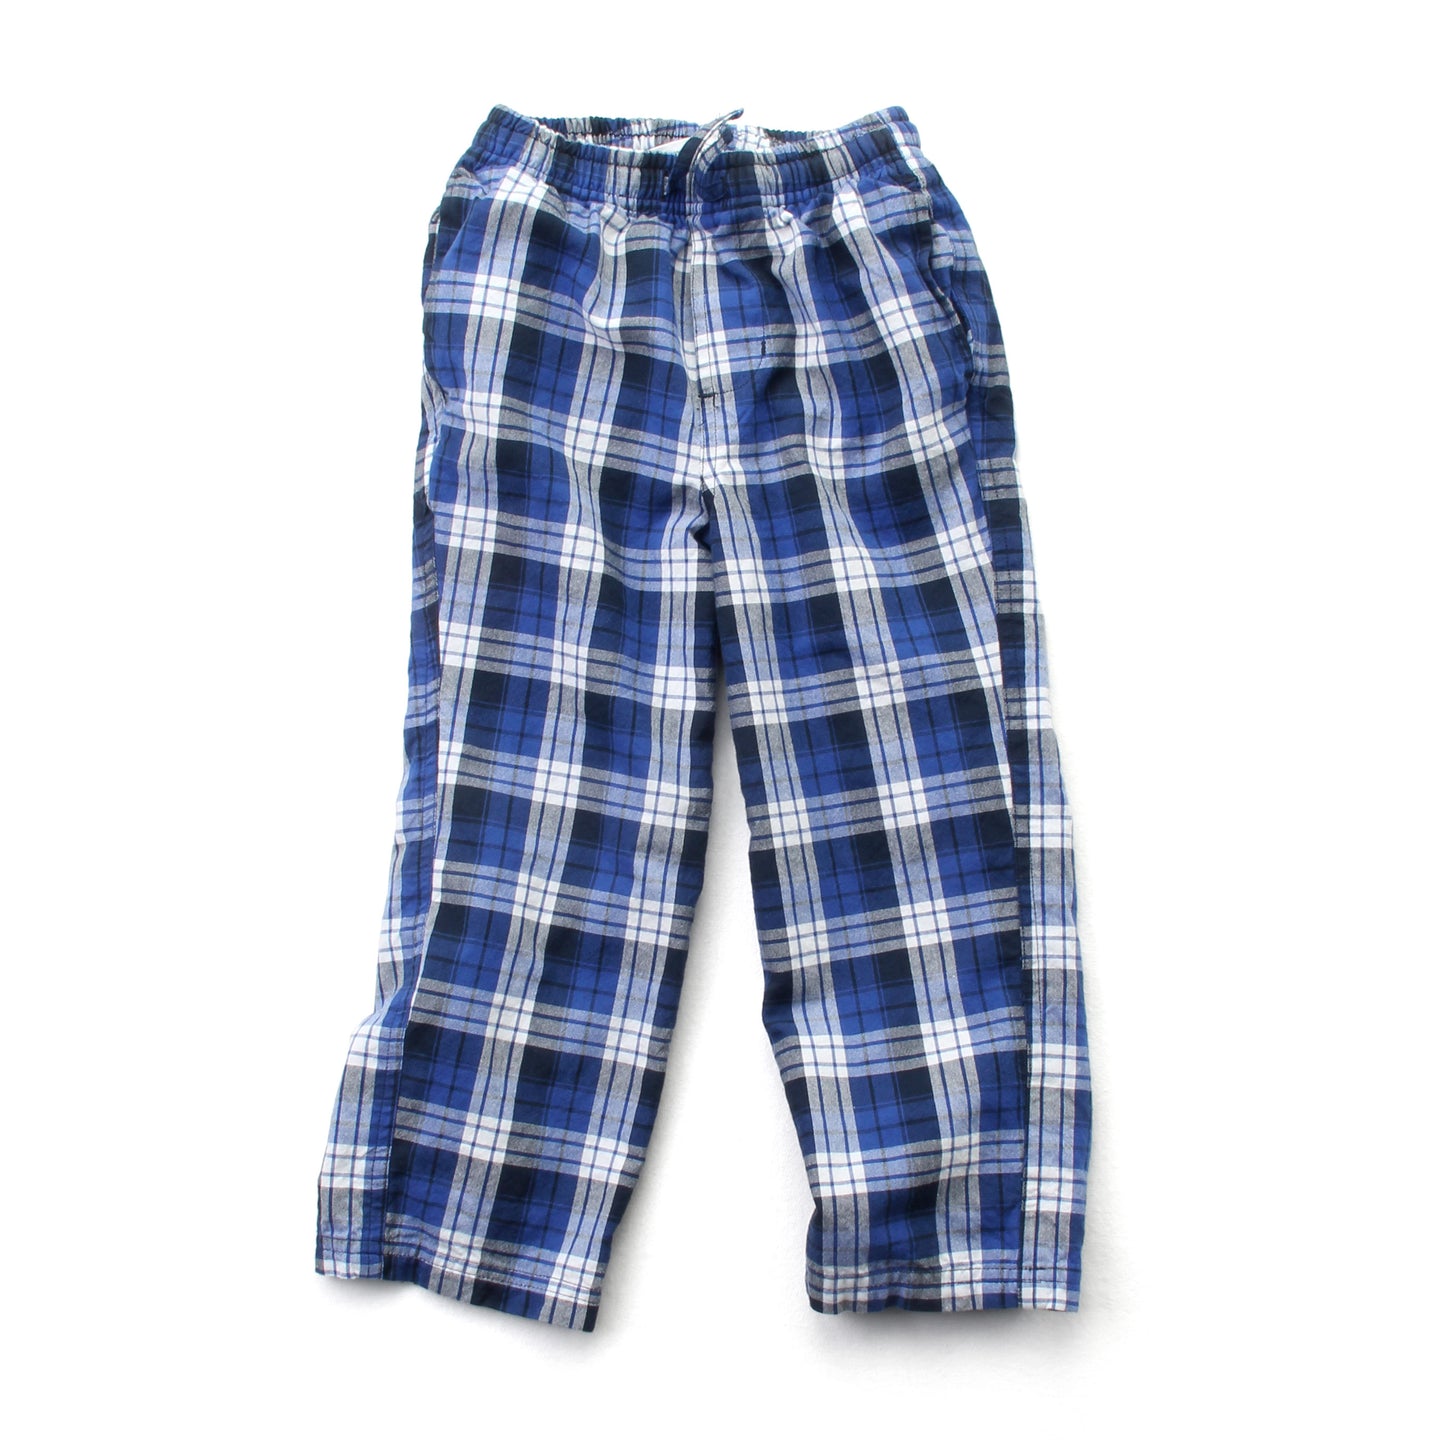 Wes and Willy Boy's Plaid Pant